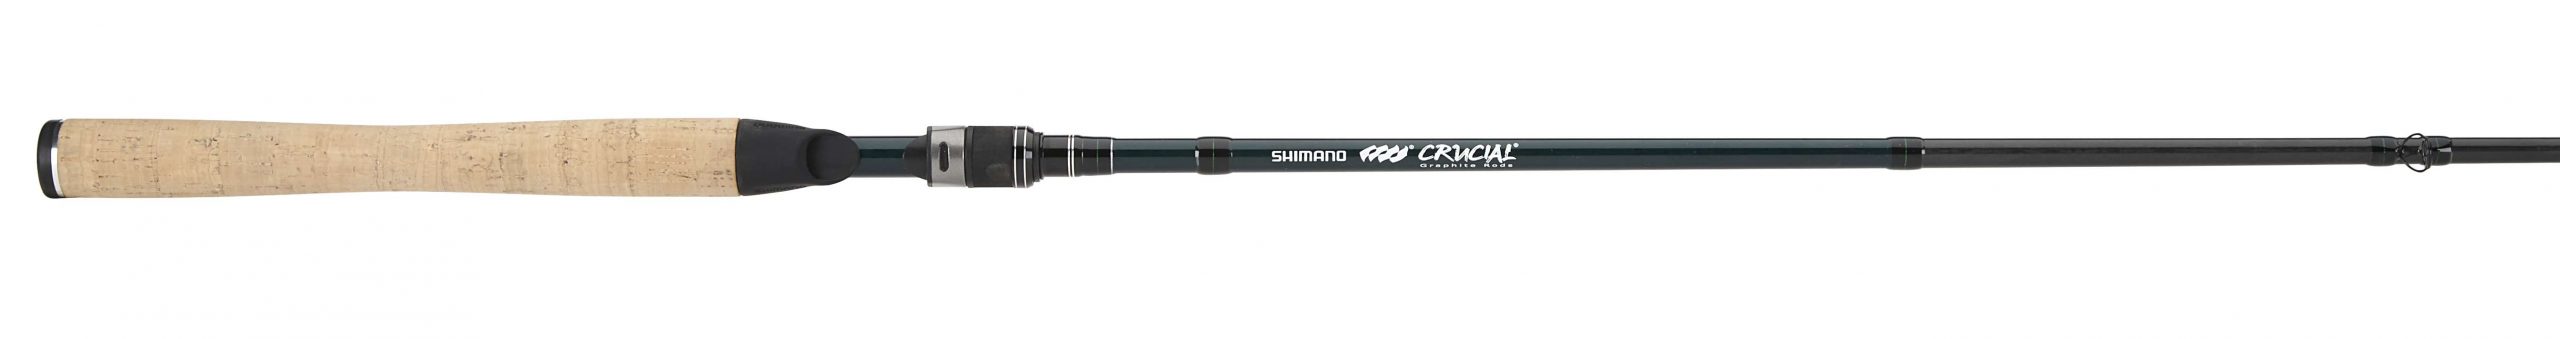 <b>Shimano</b><br>	Crucial Deep Crank Casting Rod<br>			Shimano adds to its Crucial bass rod series with the new deep-cranking Crucial 710HB, offered in the right length, power and action for long casts and solid hookset when using big deep-diving crankbaits. The rod will handle lures from 2 to 6 ounces and is rated for up to 30-pound test mono or 65-pound PowerPro braid.